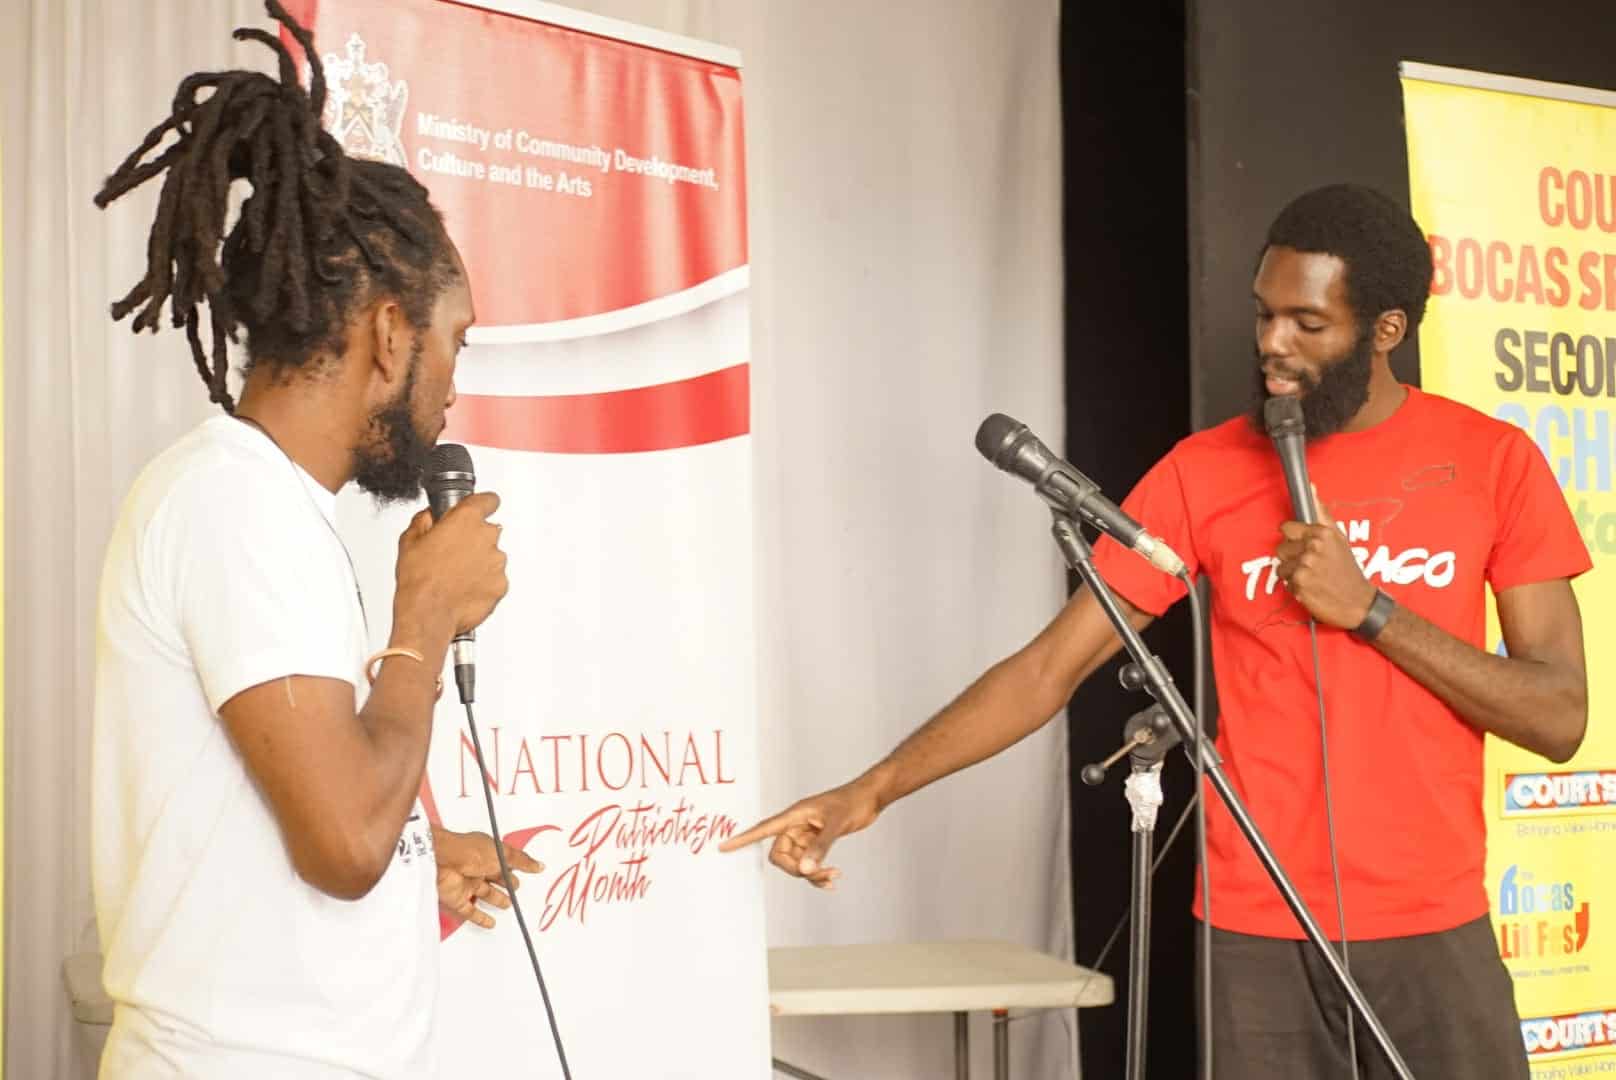 Hosts and poets, Idrees Saleem and Derron Sandy (left to right), highlight "National Patriotism Month", the reason for the tour's partnership with the CDCA Ministry. 